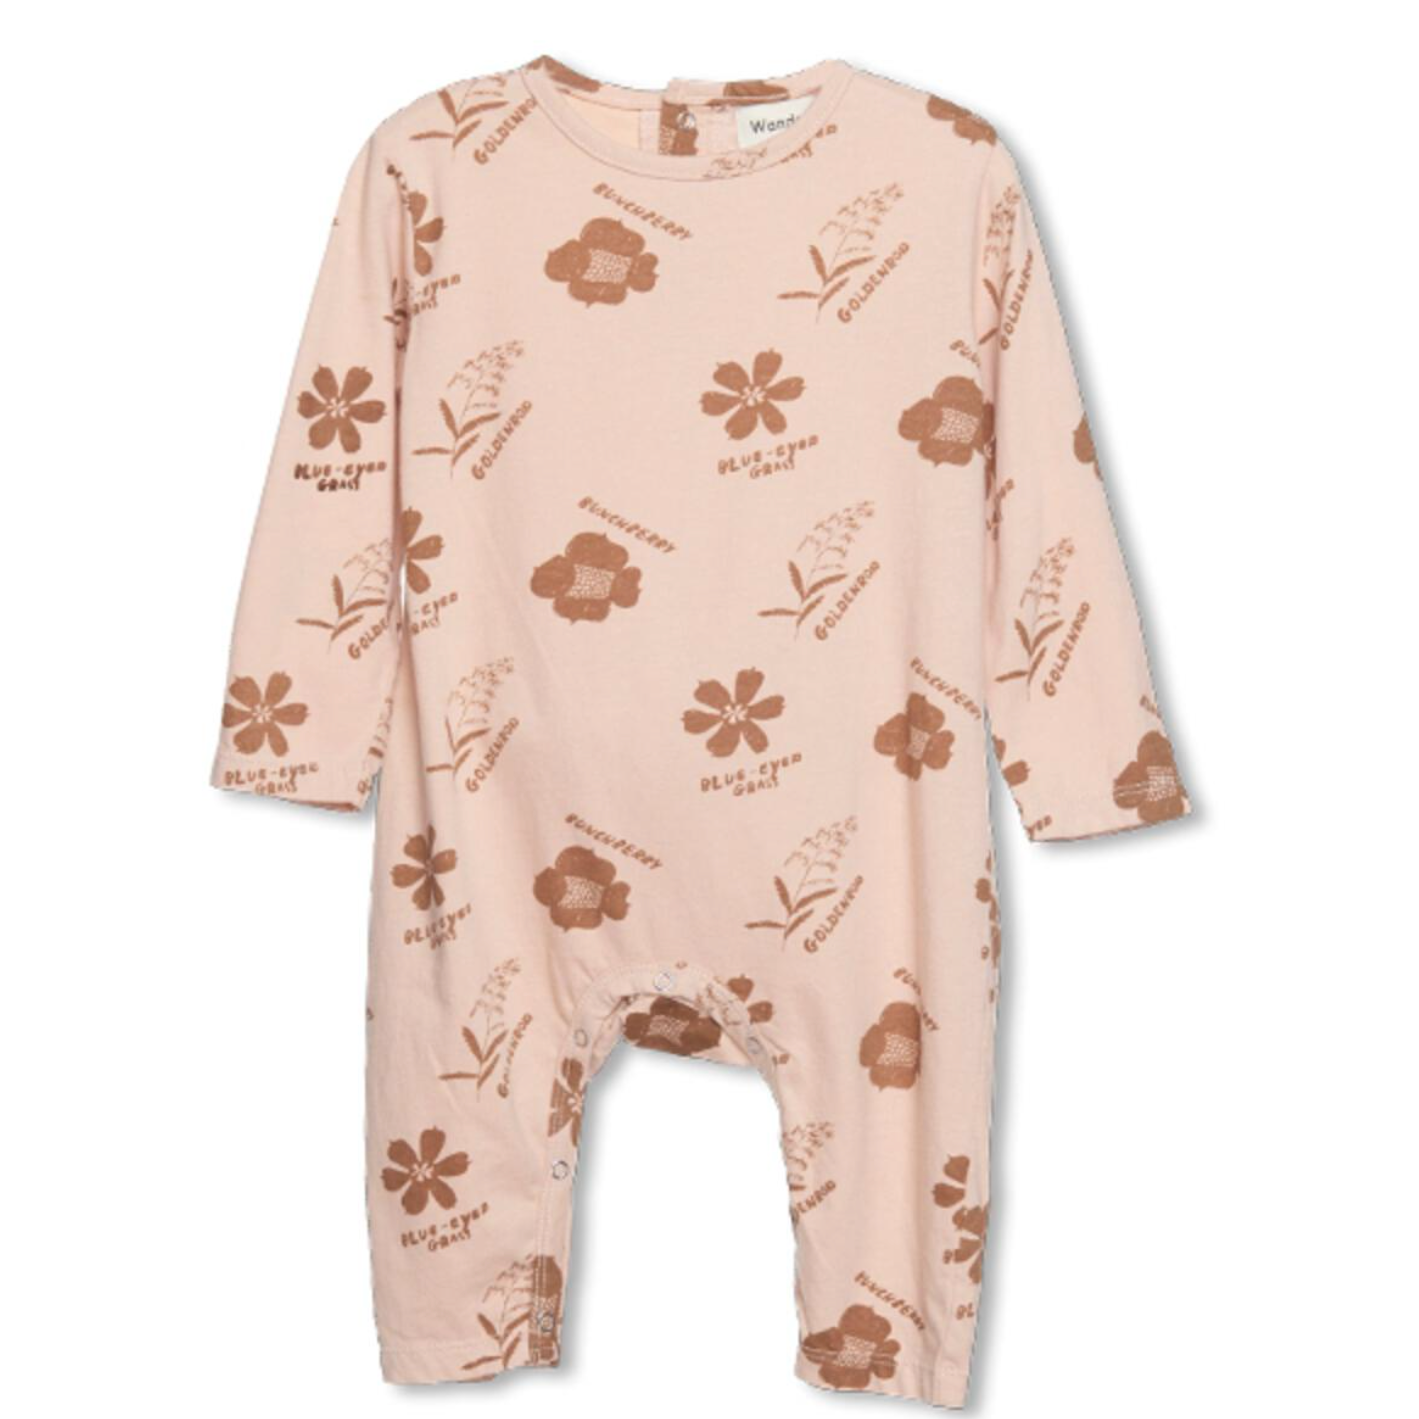 baby romper in almond floral